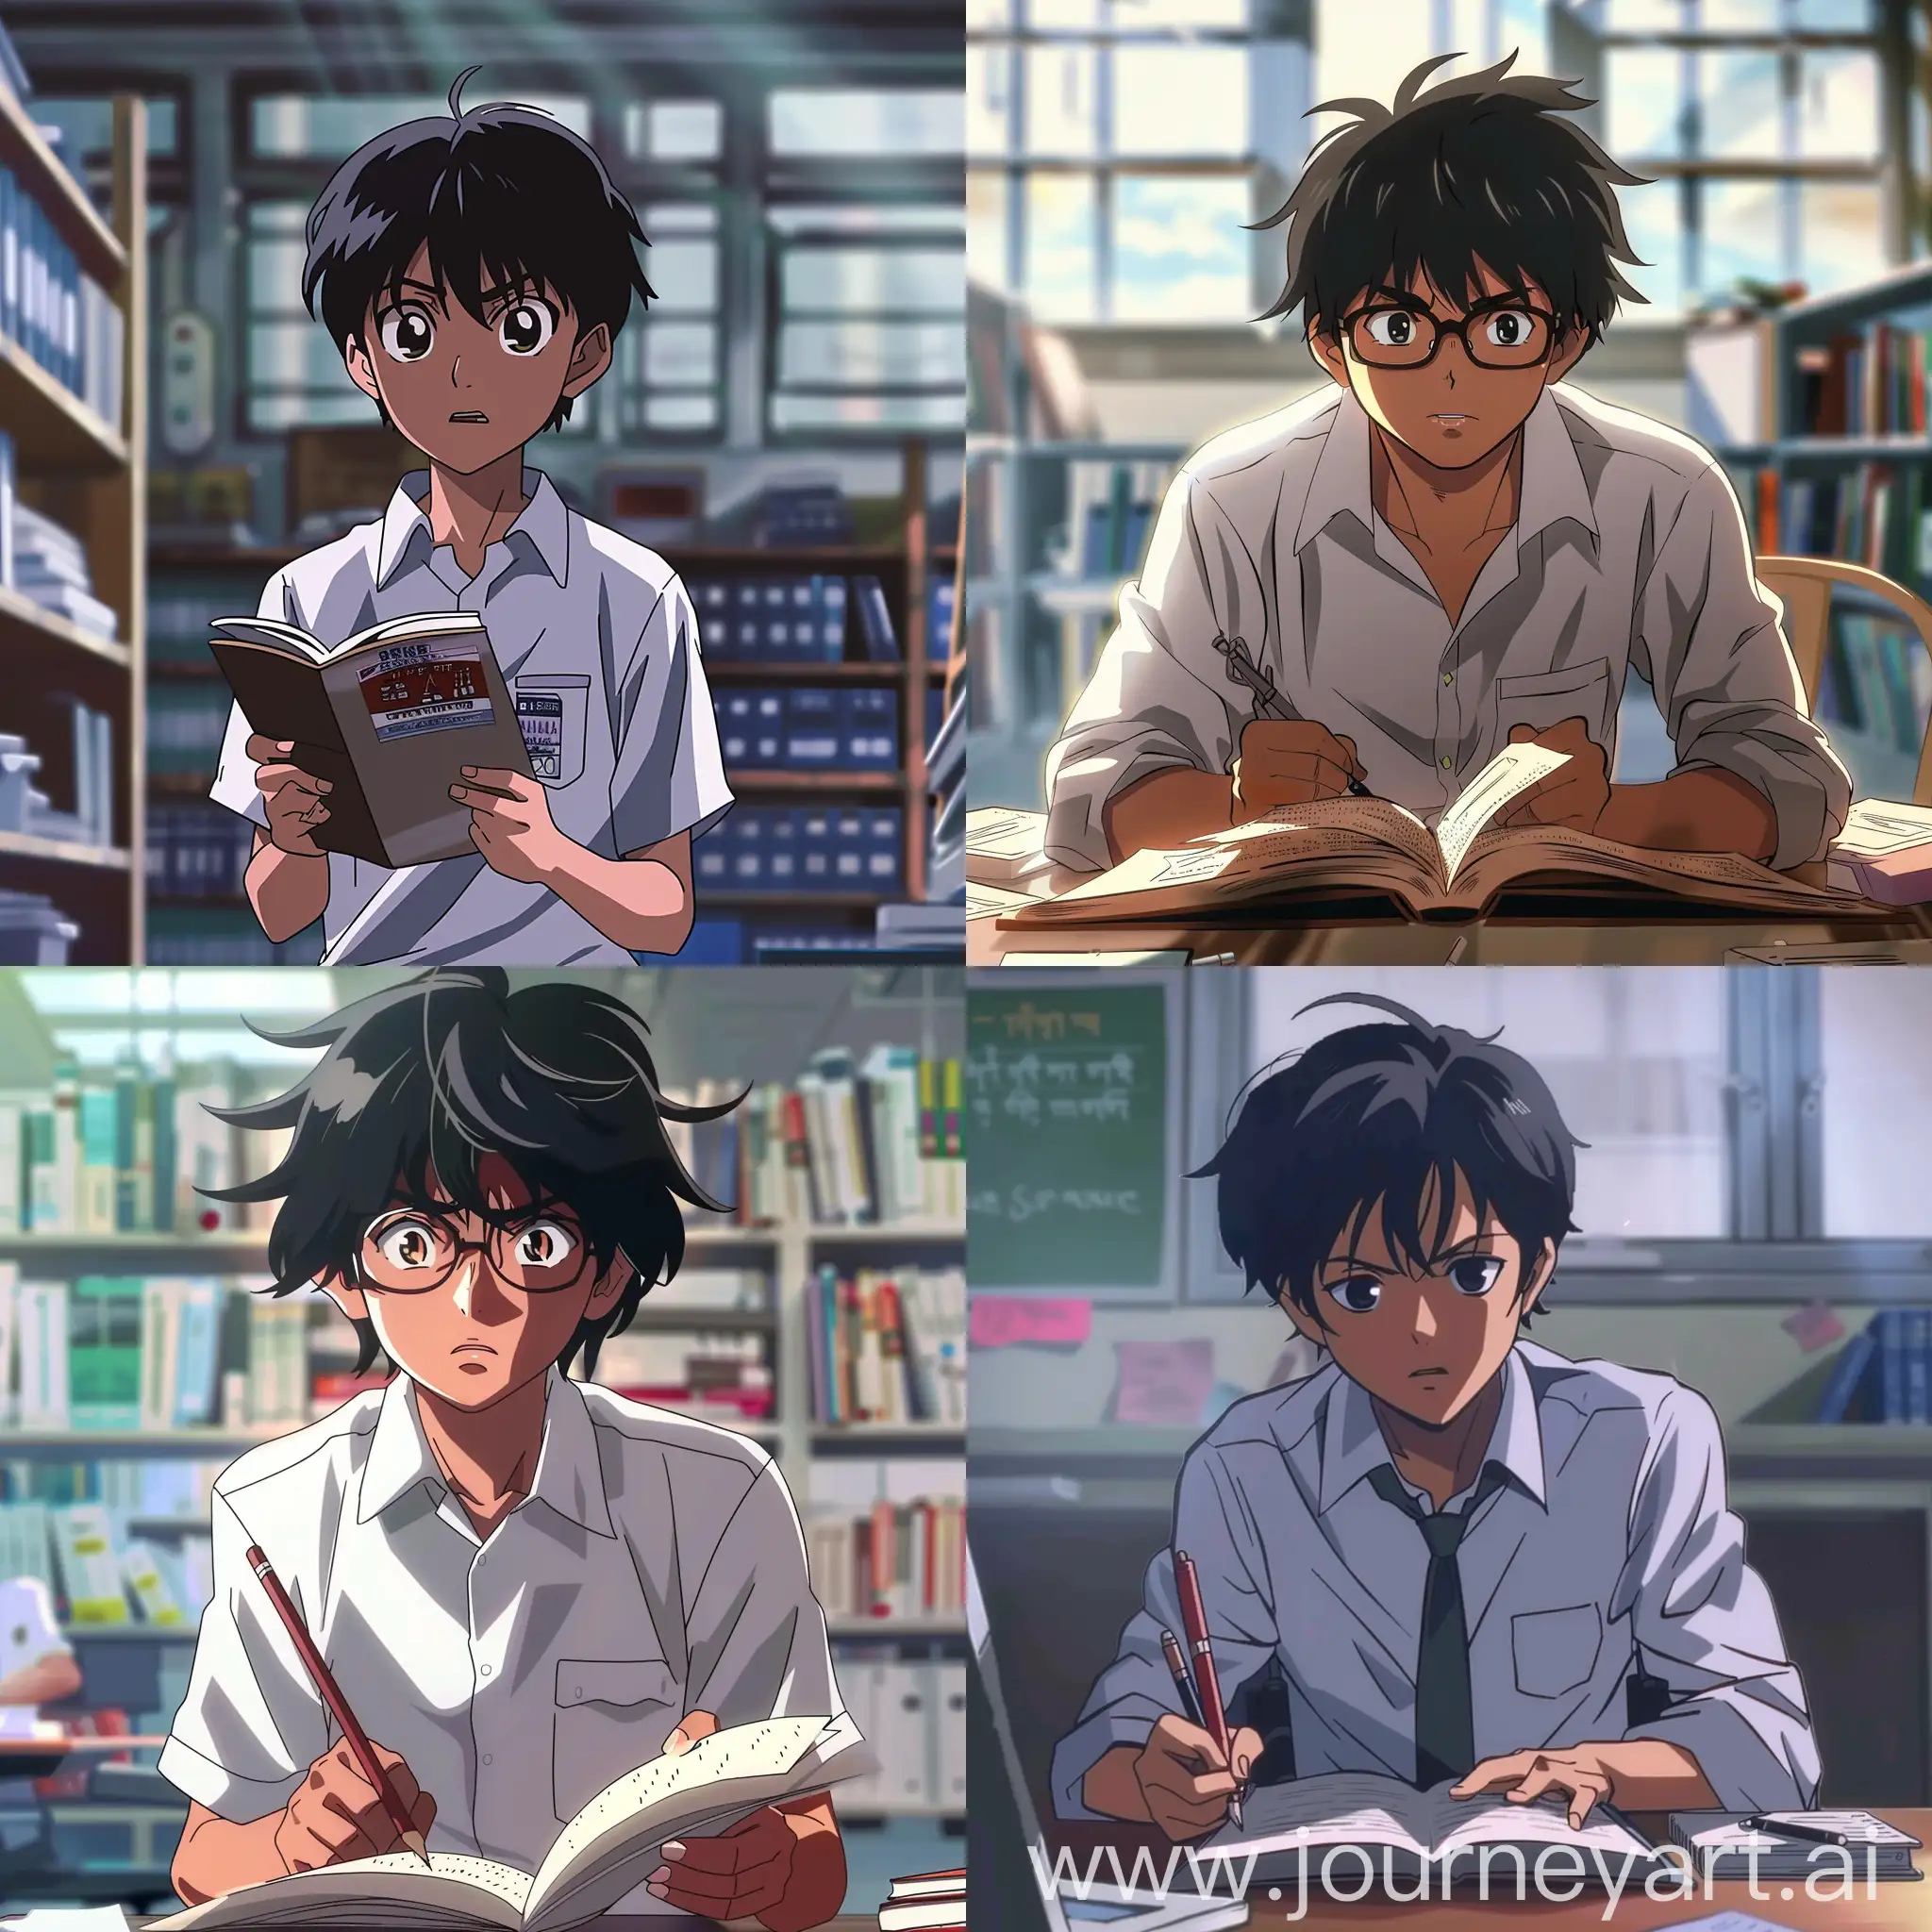 Indian boy was an Anime protagonist who is an aspiring jee student who studies whole day